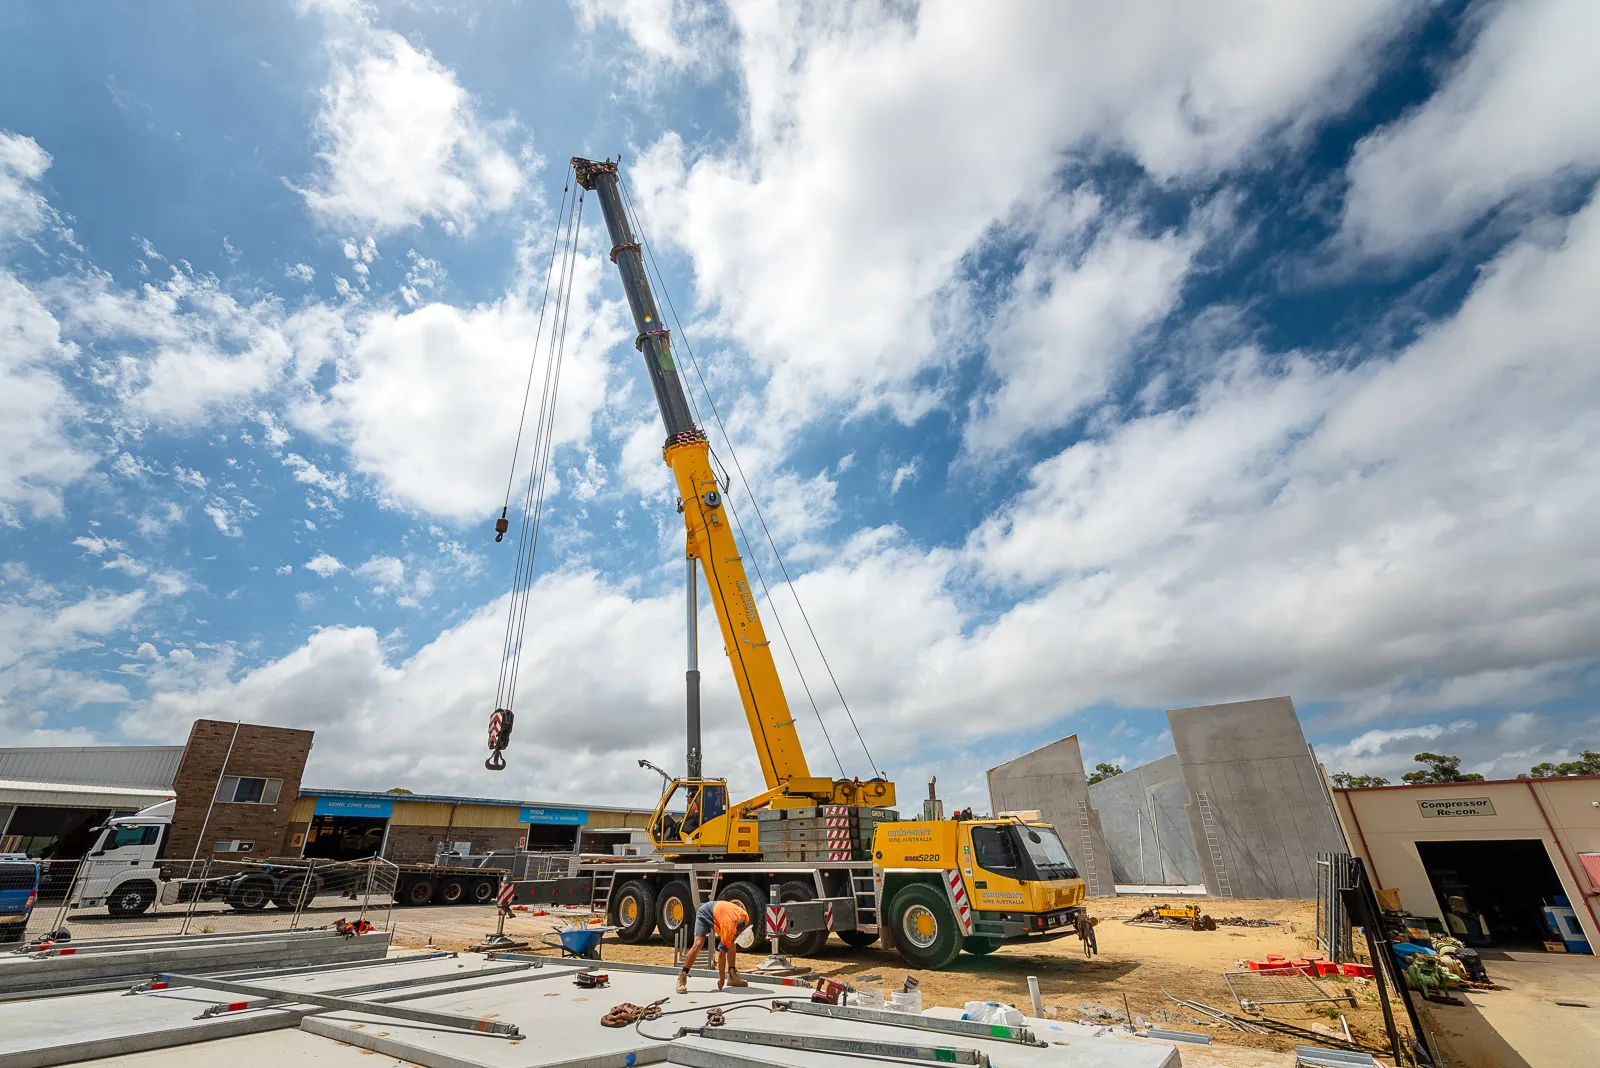 JD Rigging & Construction, Equipment Hire Australia  crane on a building project erecting concrete panels and steel structures 